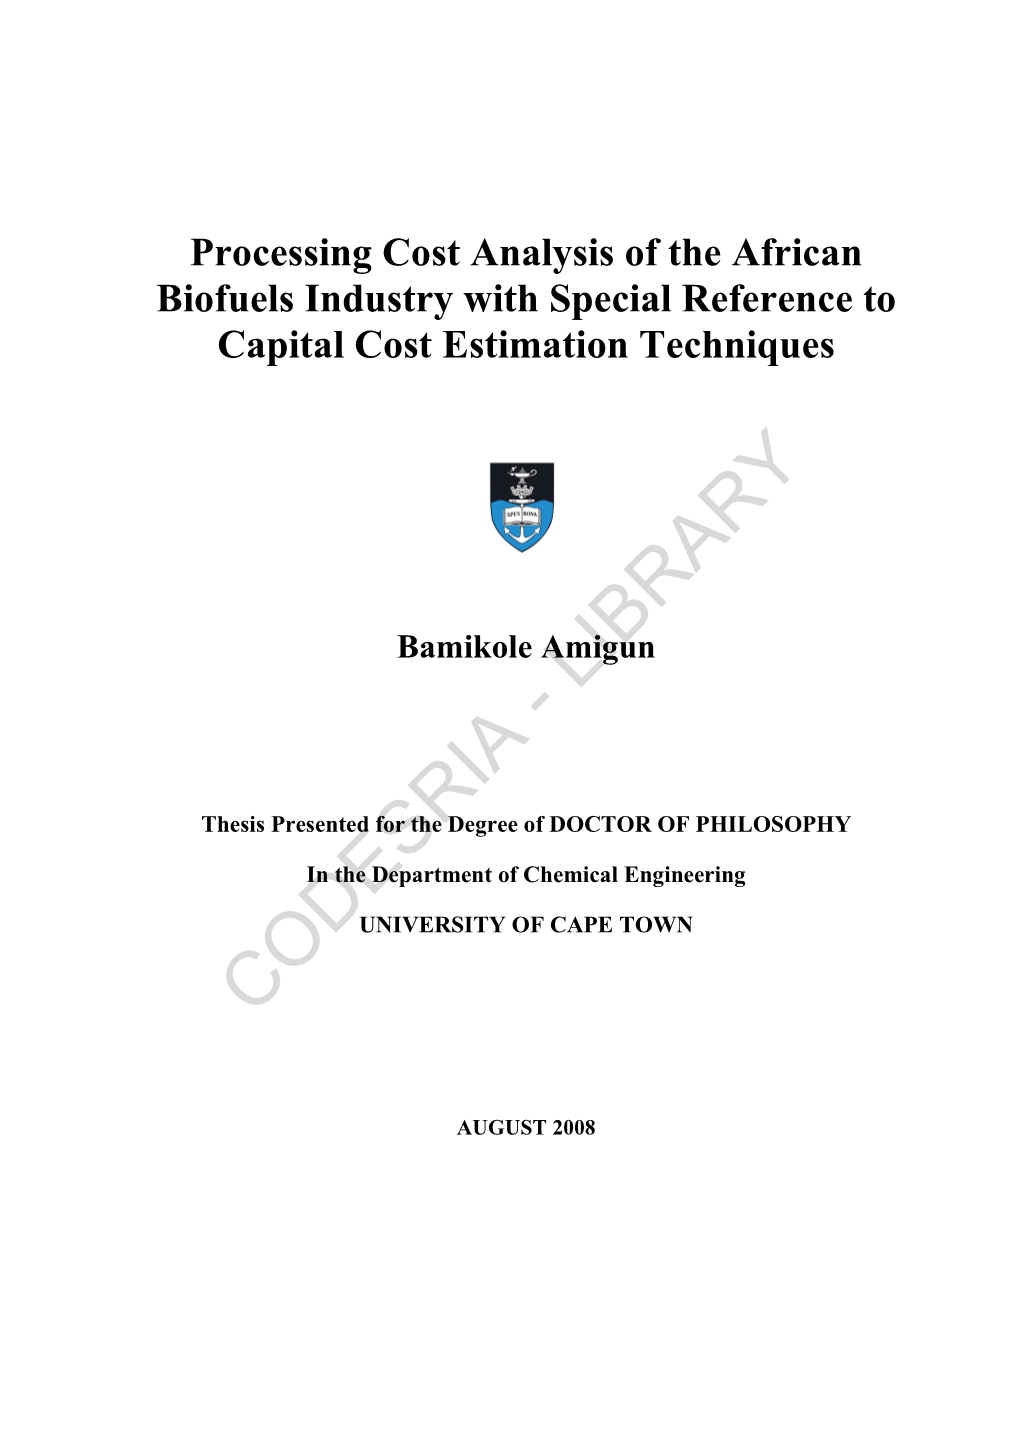 Processing Cost Analysis of the African Biofuels Industry with Special Reference to Capital Cost Estimation Techniques